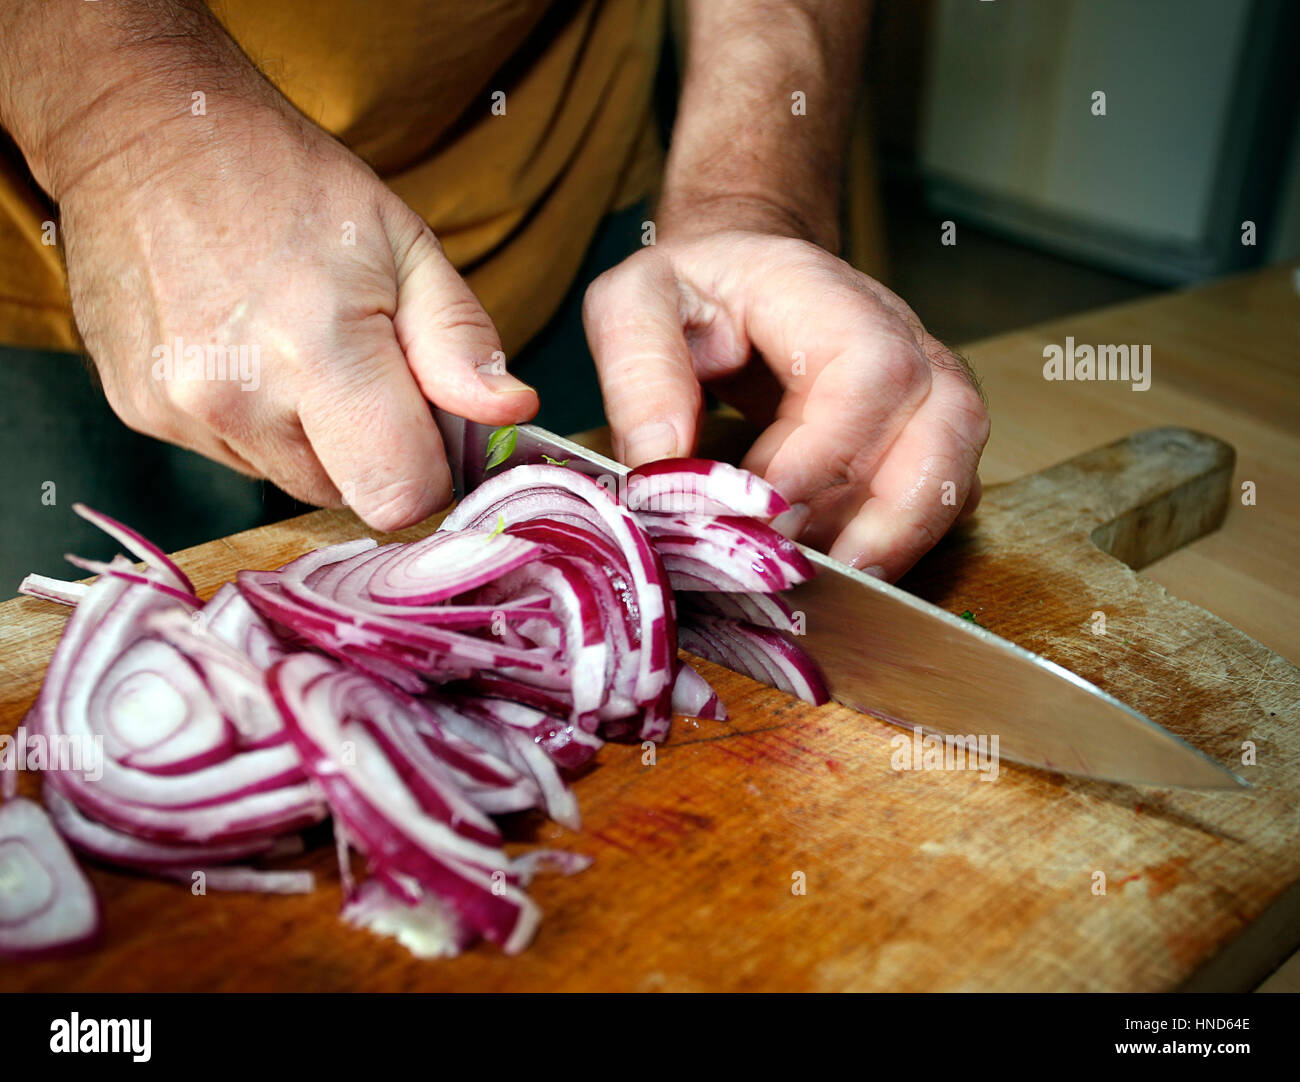 Picture of man's hands cutting red onion on wooden cutting board Stock Photo